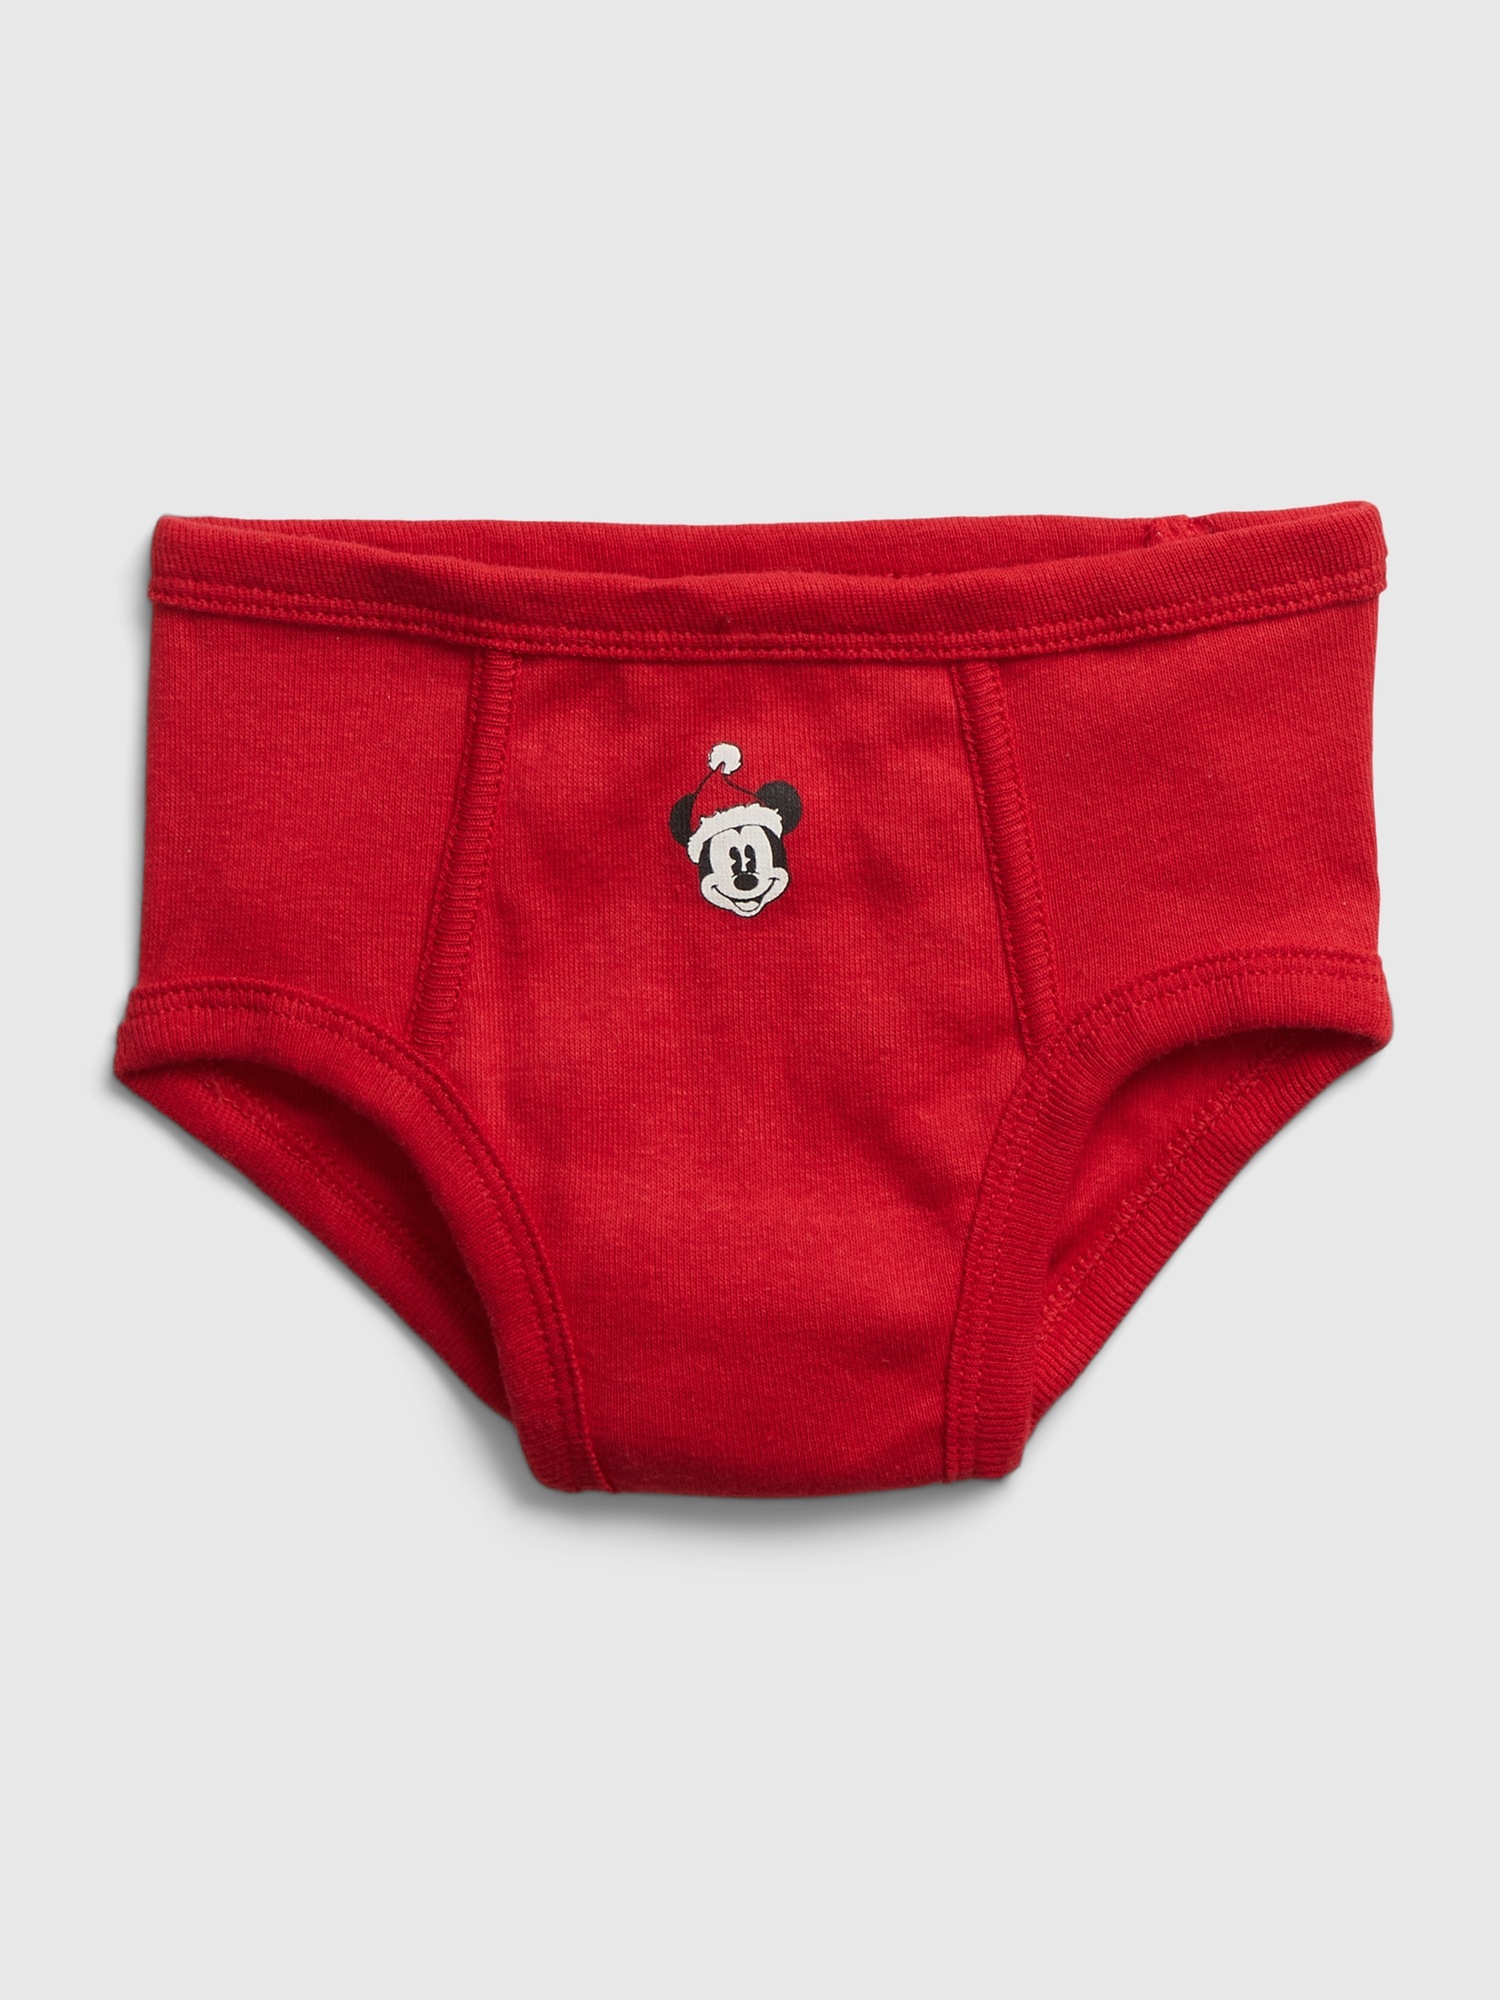 babyGap, Disney 100% Organic Cotton Holiday Mickey Mouse Briefs (7-Pack)